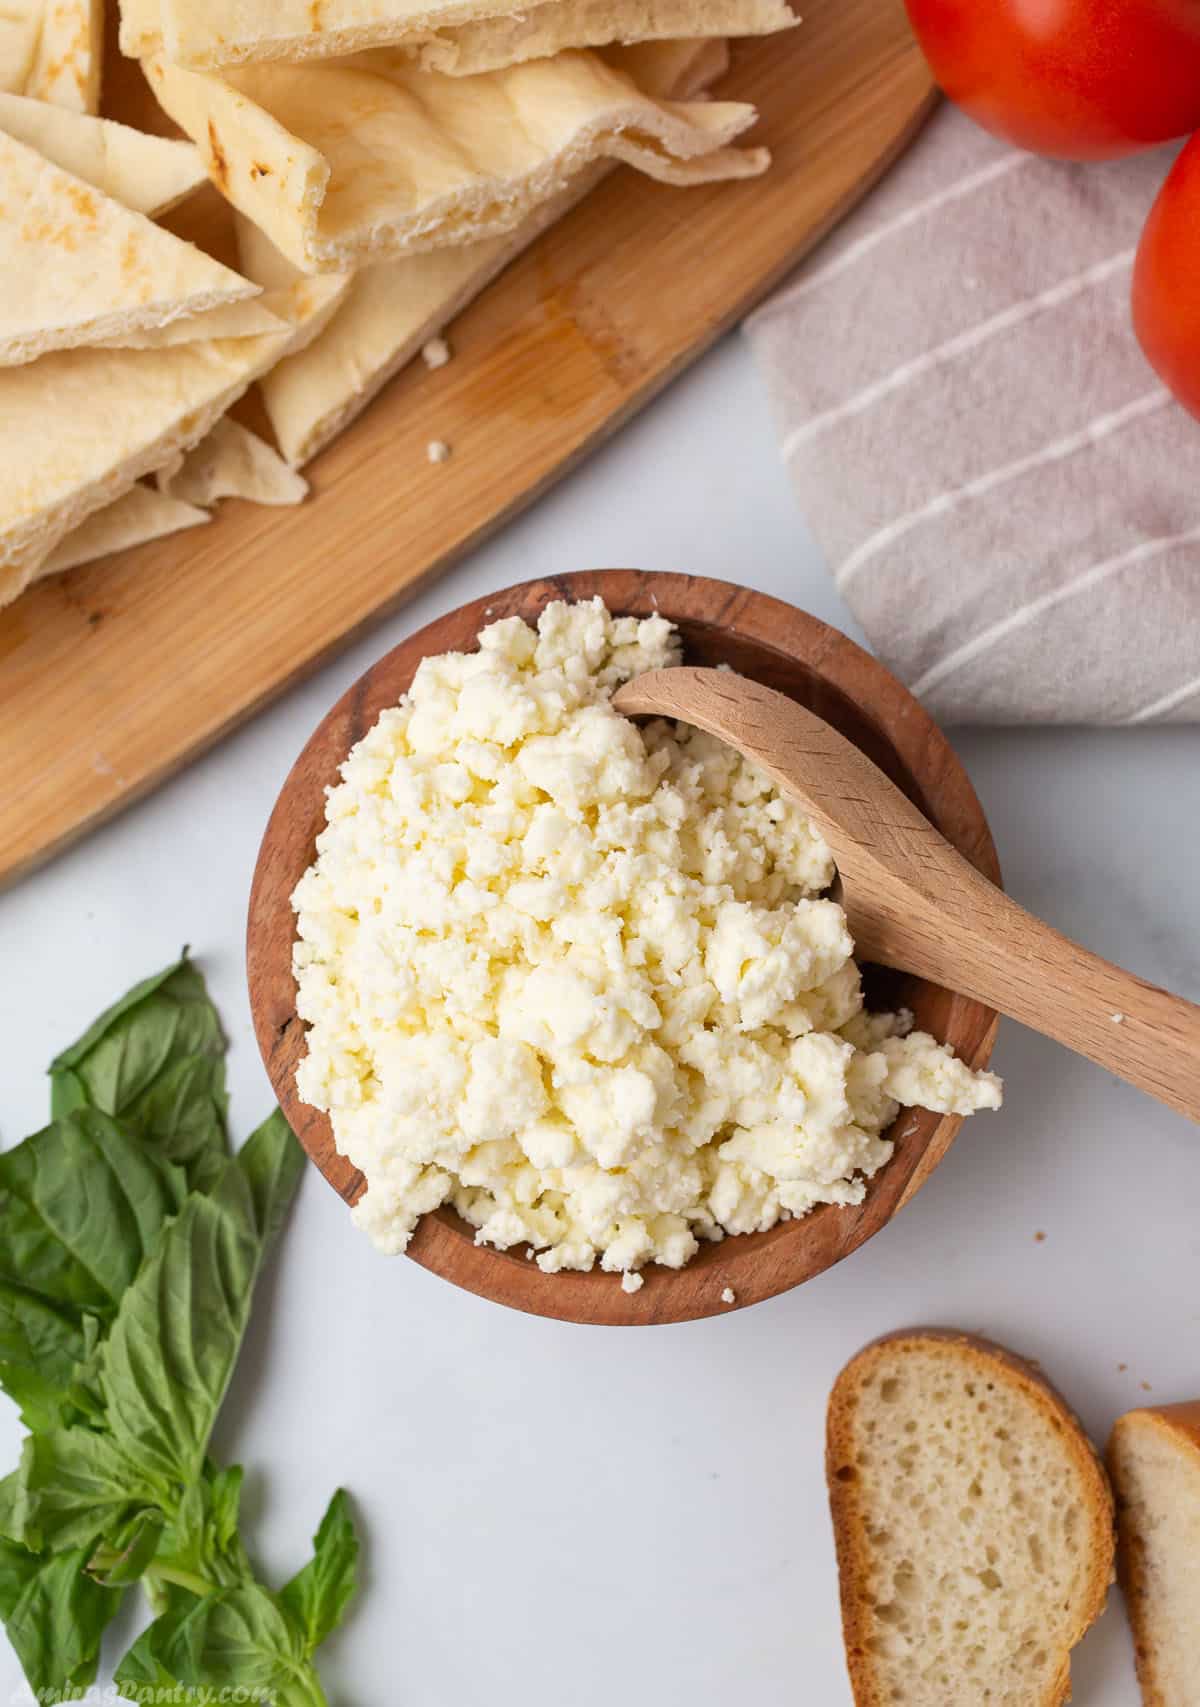 Ricotta cheese on a wooden bowl with a wooden spoon, some bread and basil on the picture.